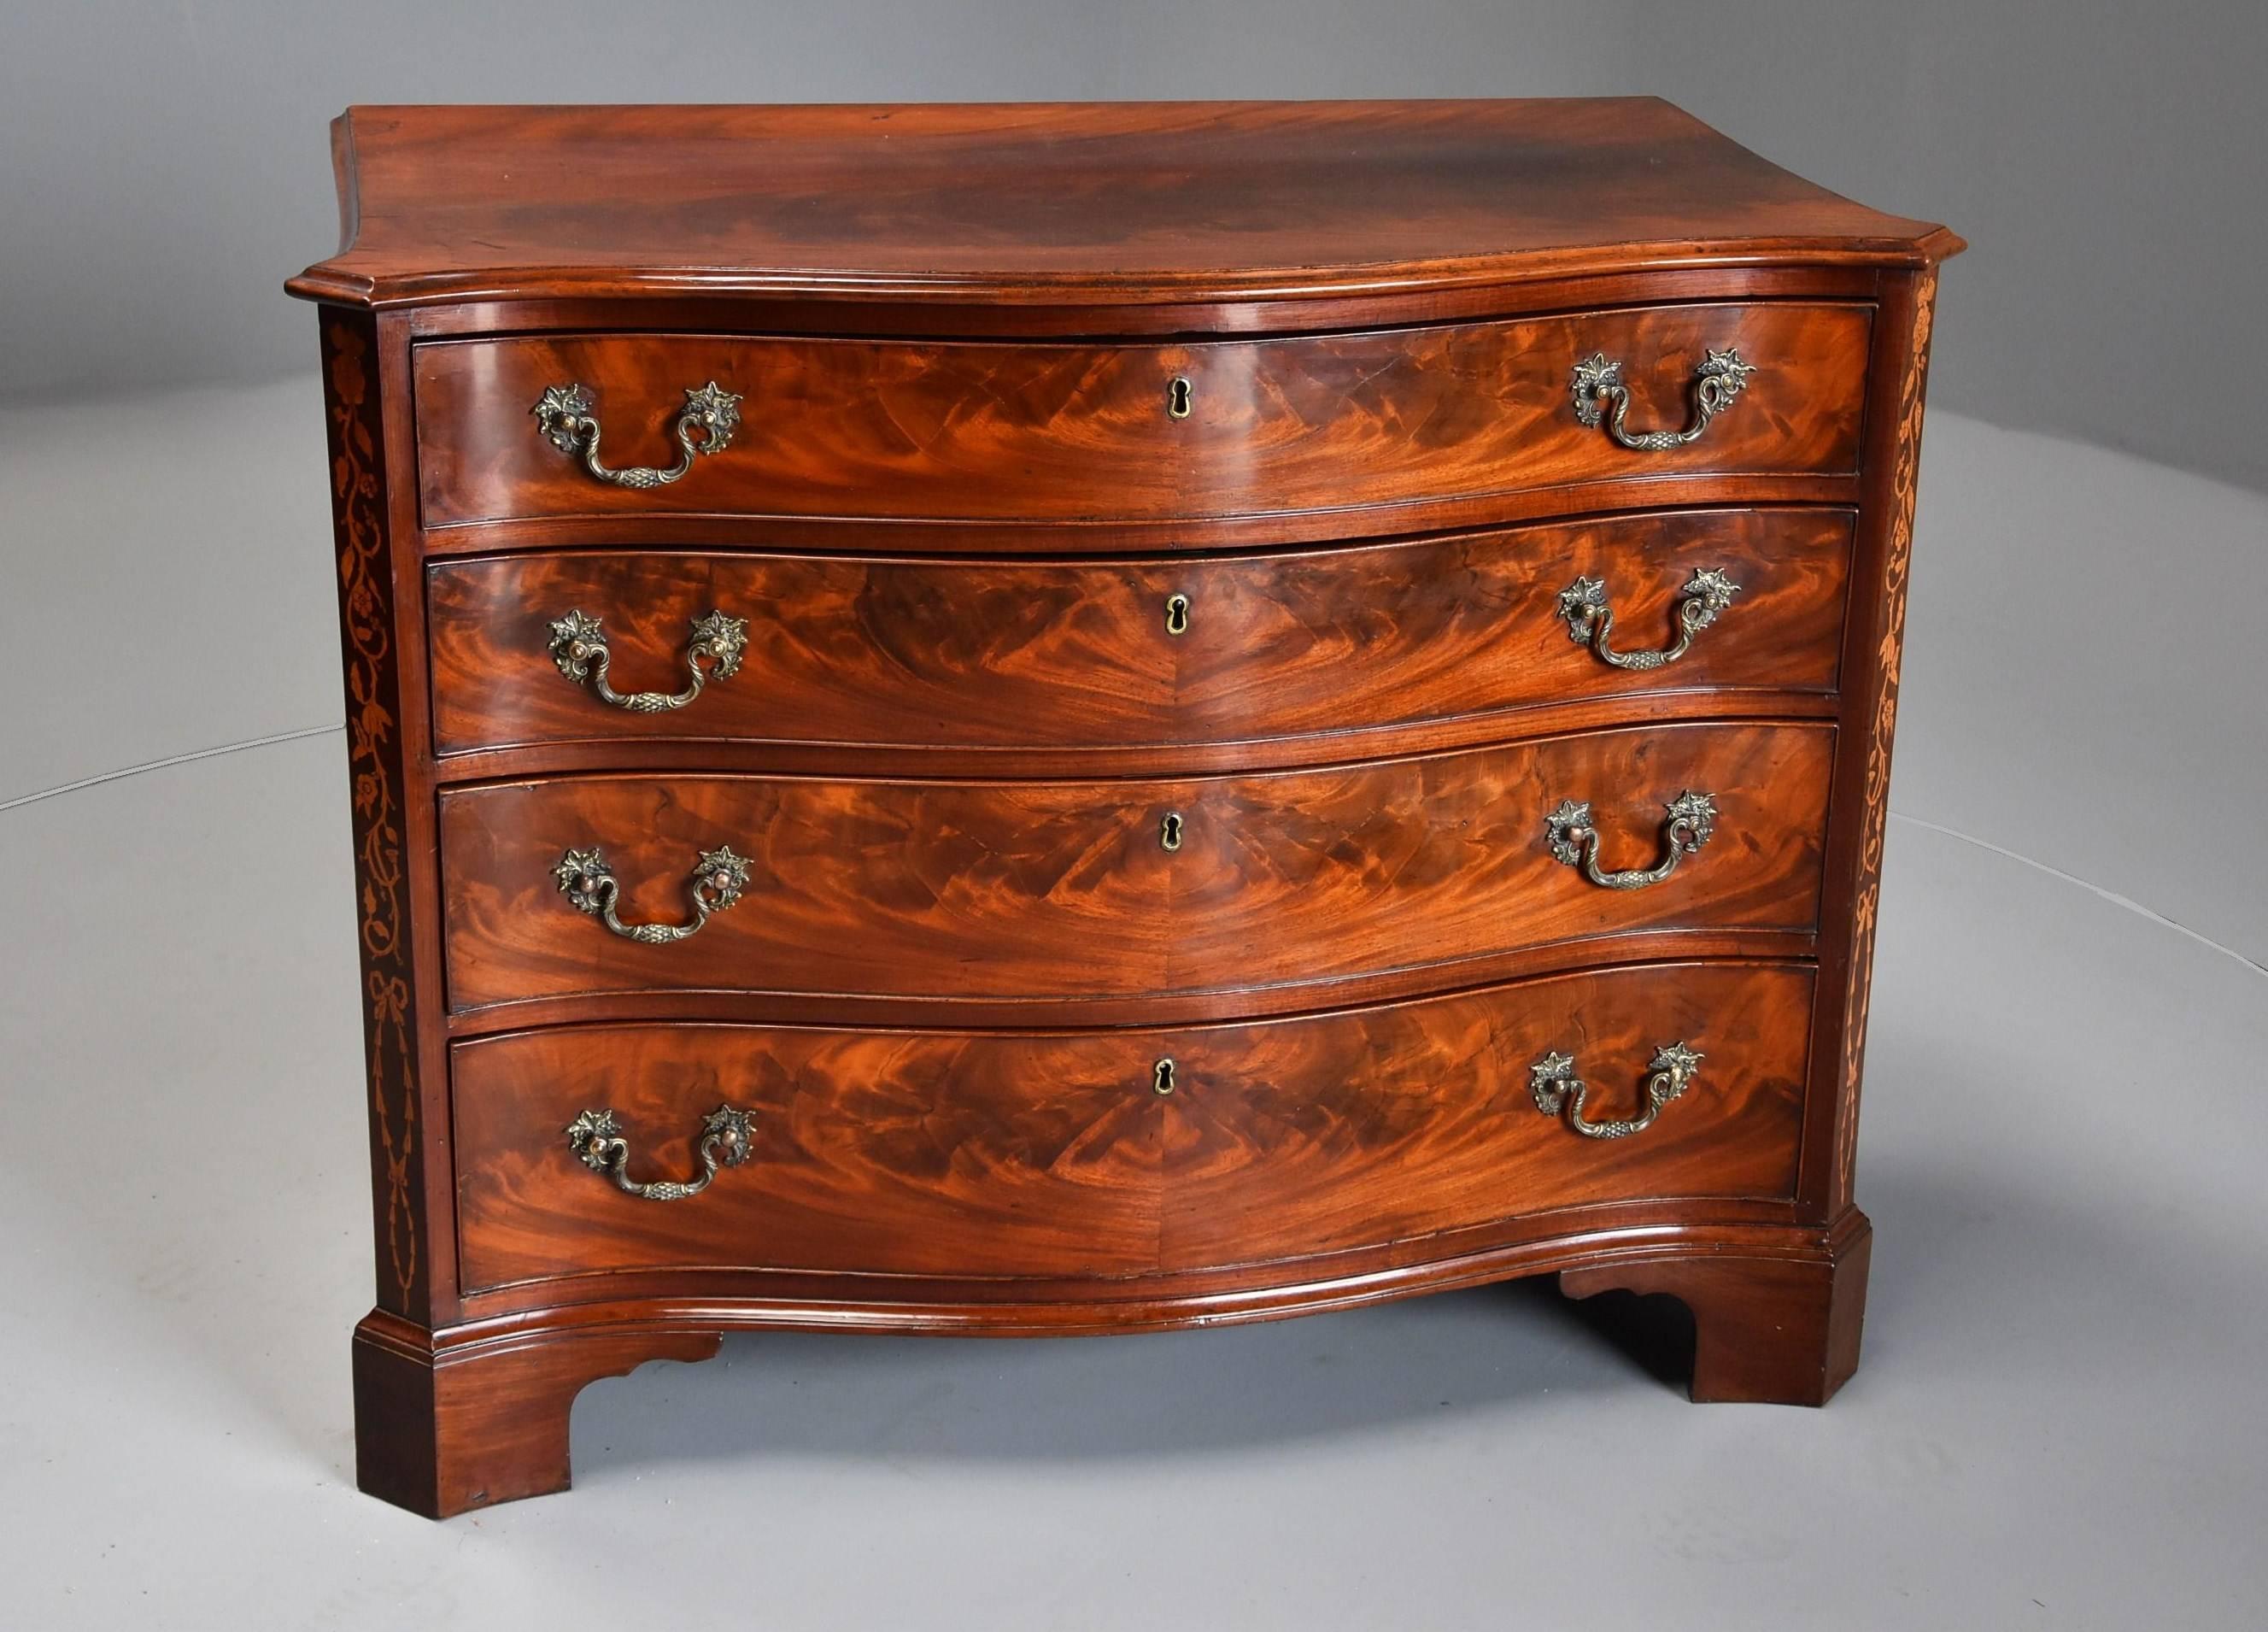 A superb quality mid-19th century mahogany serpentine chest of drawers in the 18th century style of fine patina (color).

This serpentine chest of drawers consists of a curl mahogany veneered top with moulded and shaped edge.

This leads down to